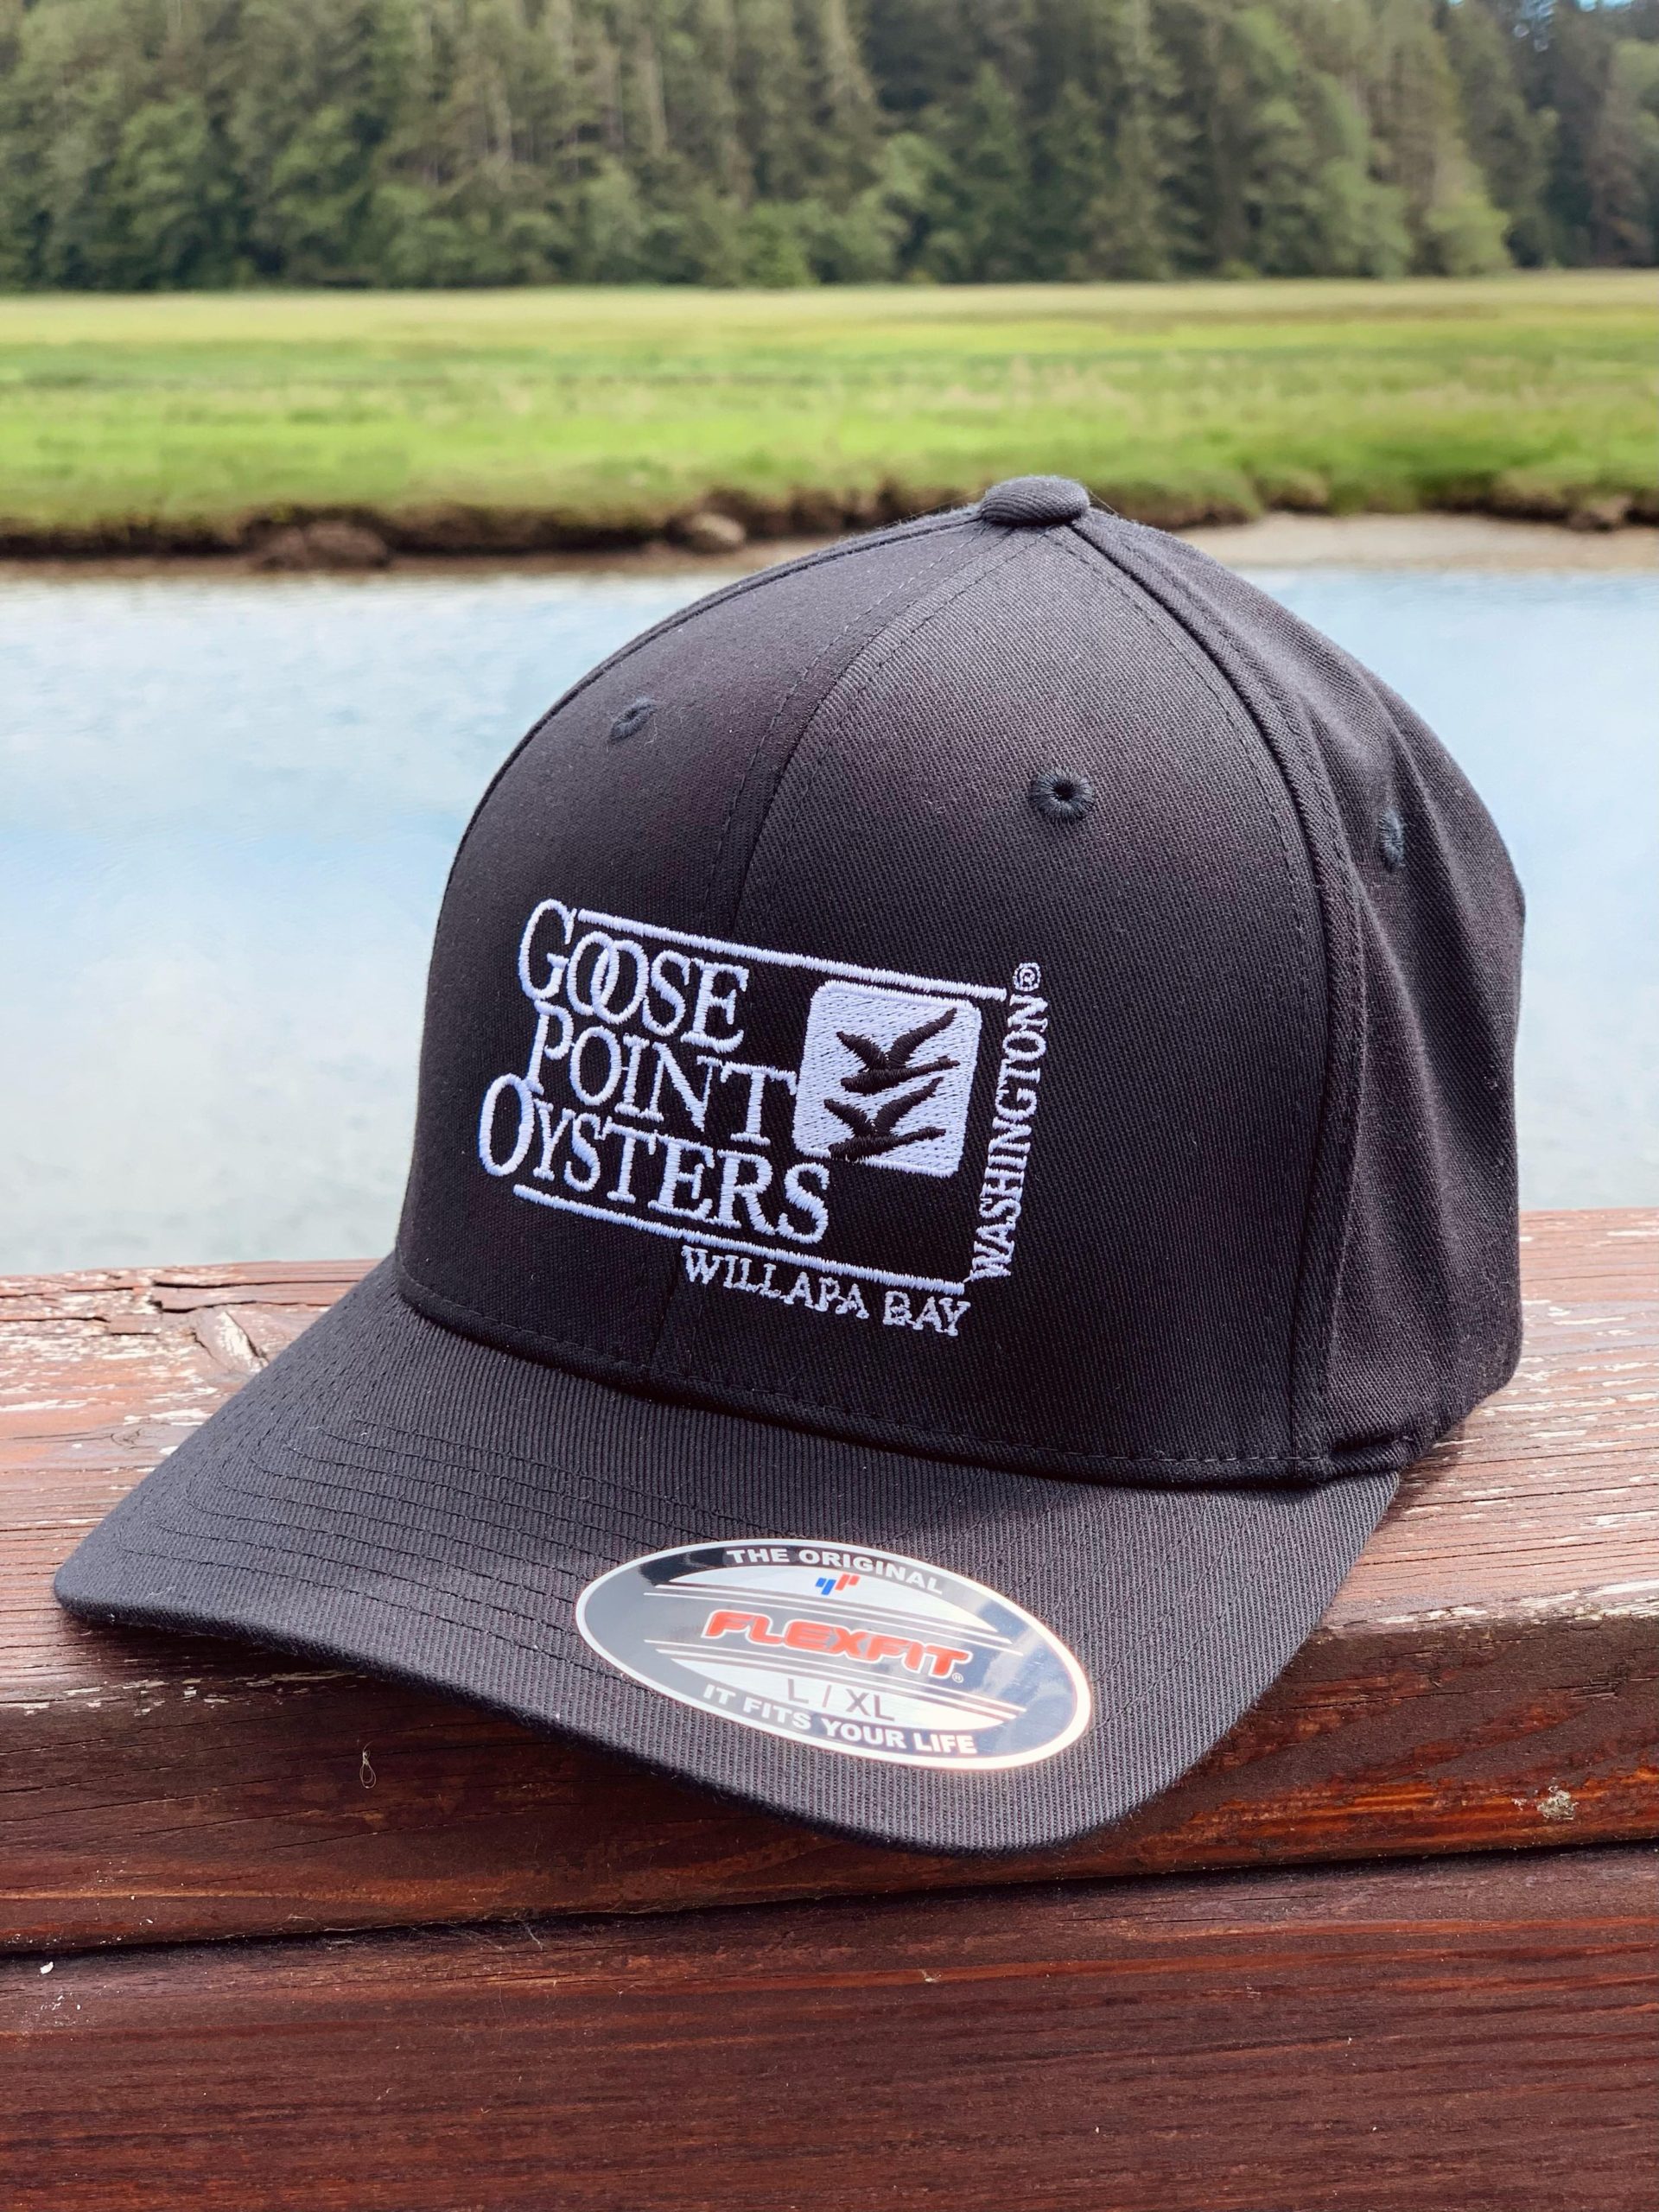 Point Shellfish Goose - Flex Hat Oysters Oystery & Goose Fit Point Farm